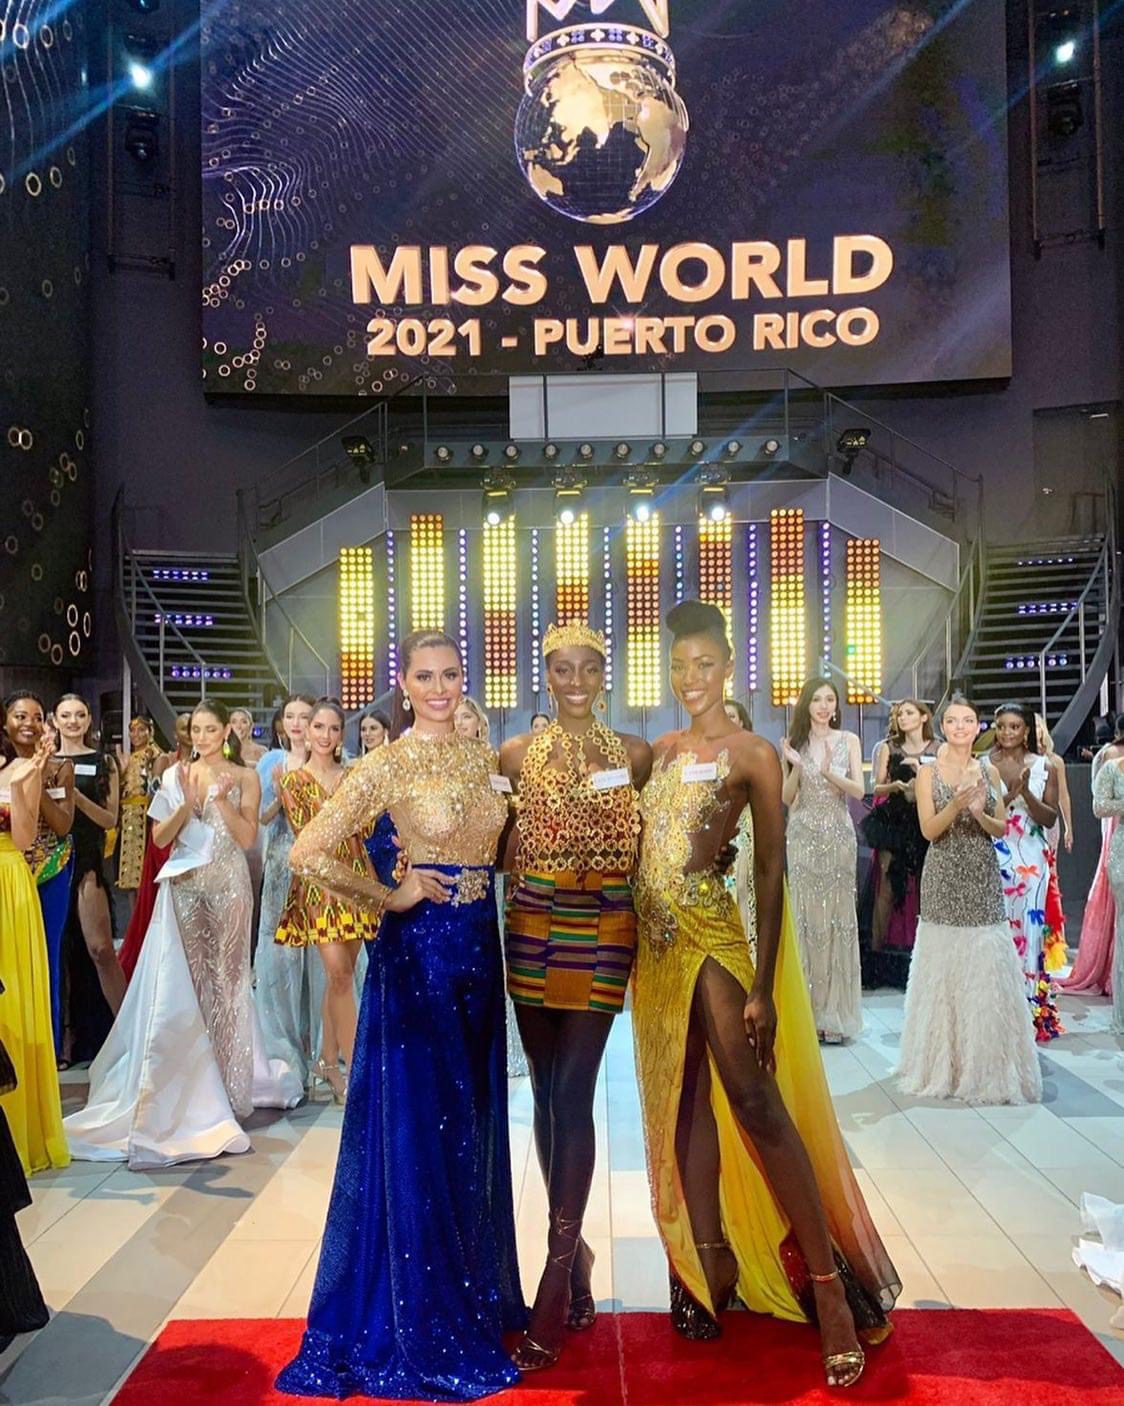 Miss Cameroon comes 2nd place in the Miss World Top Model Competition 